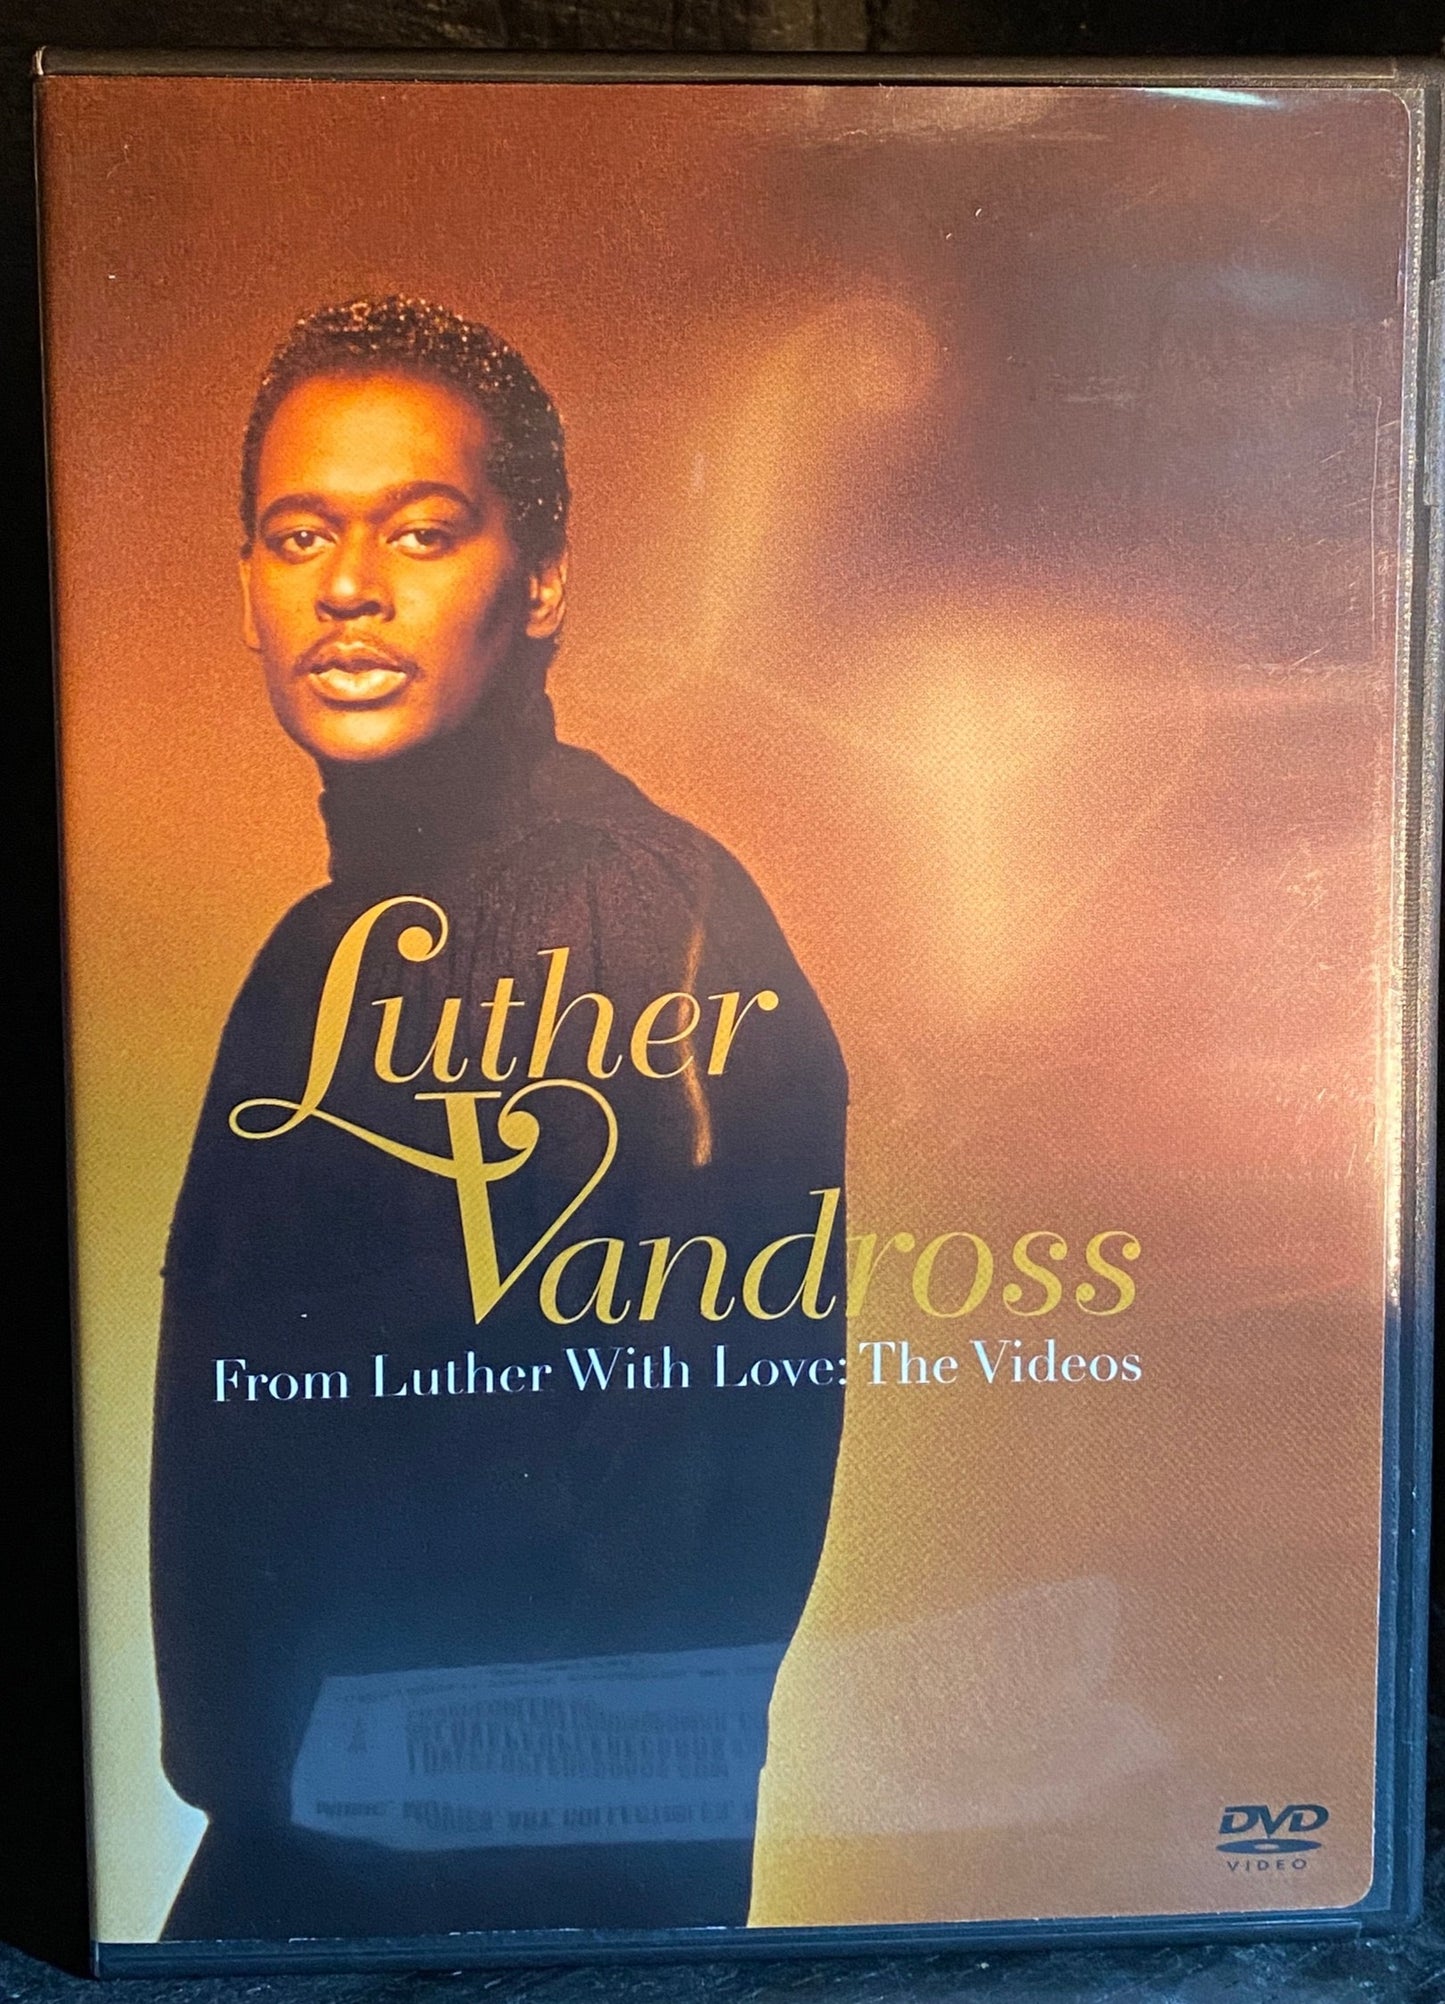 Luther Vandross - From Luther With Love: Videos